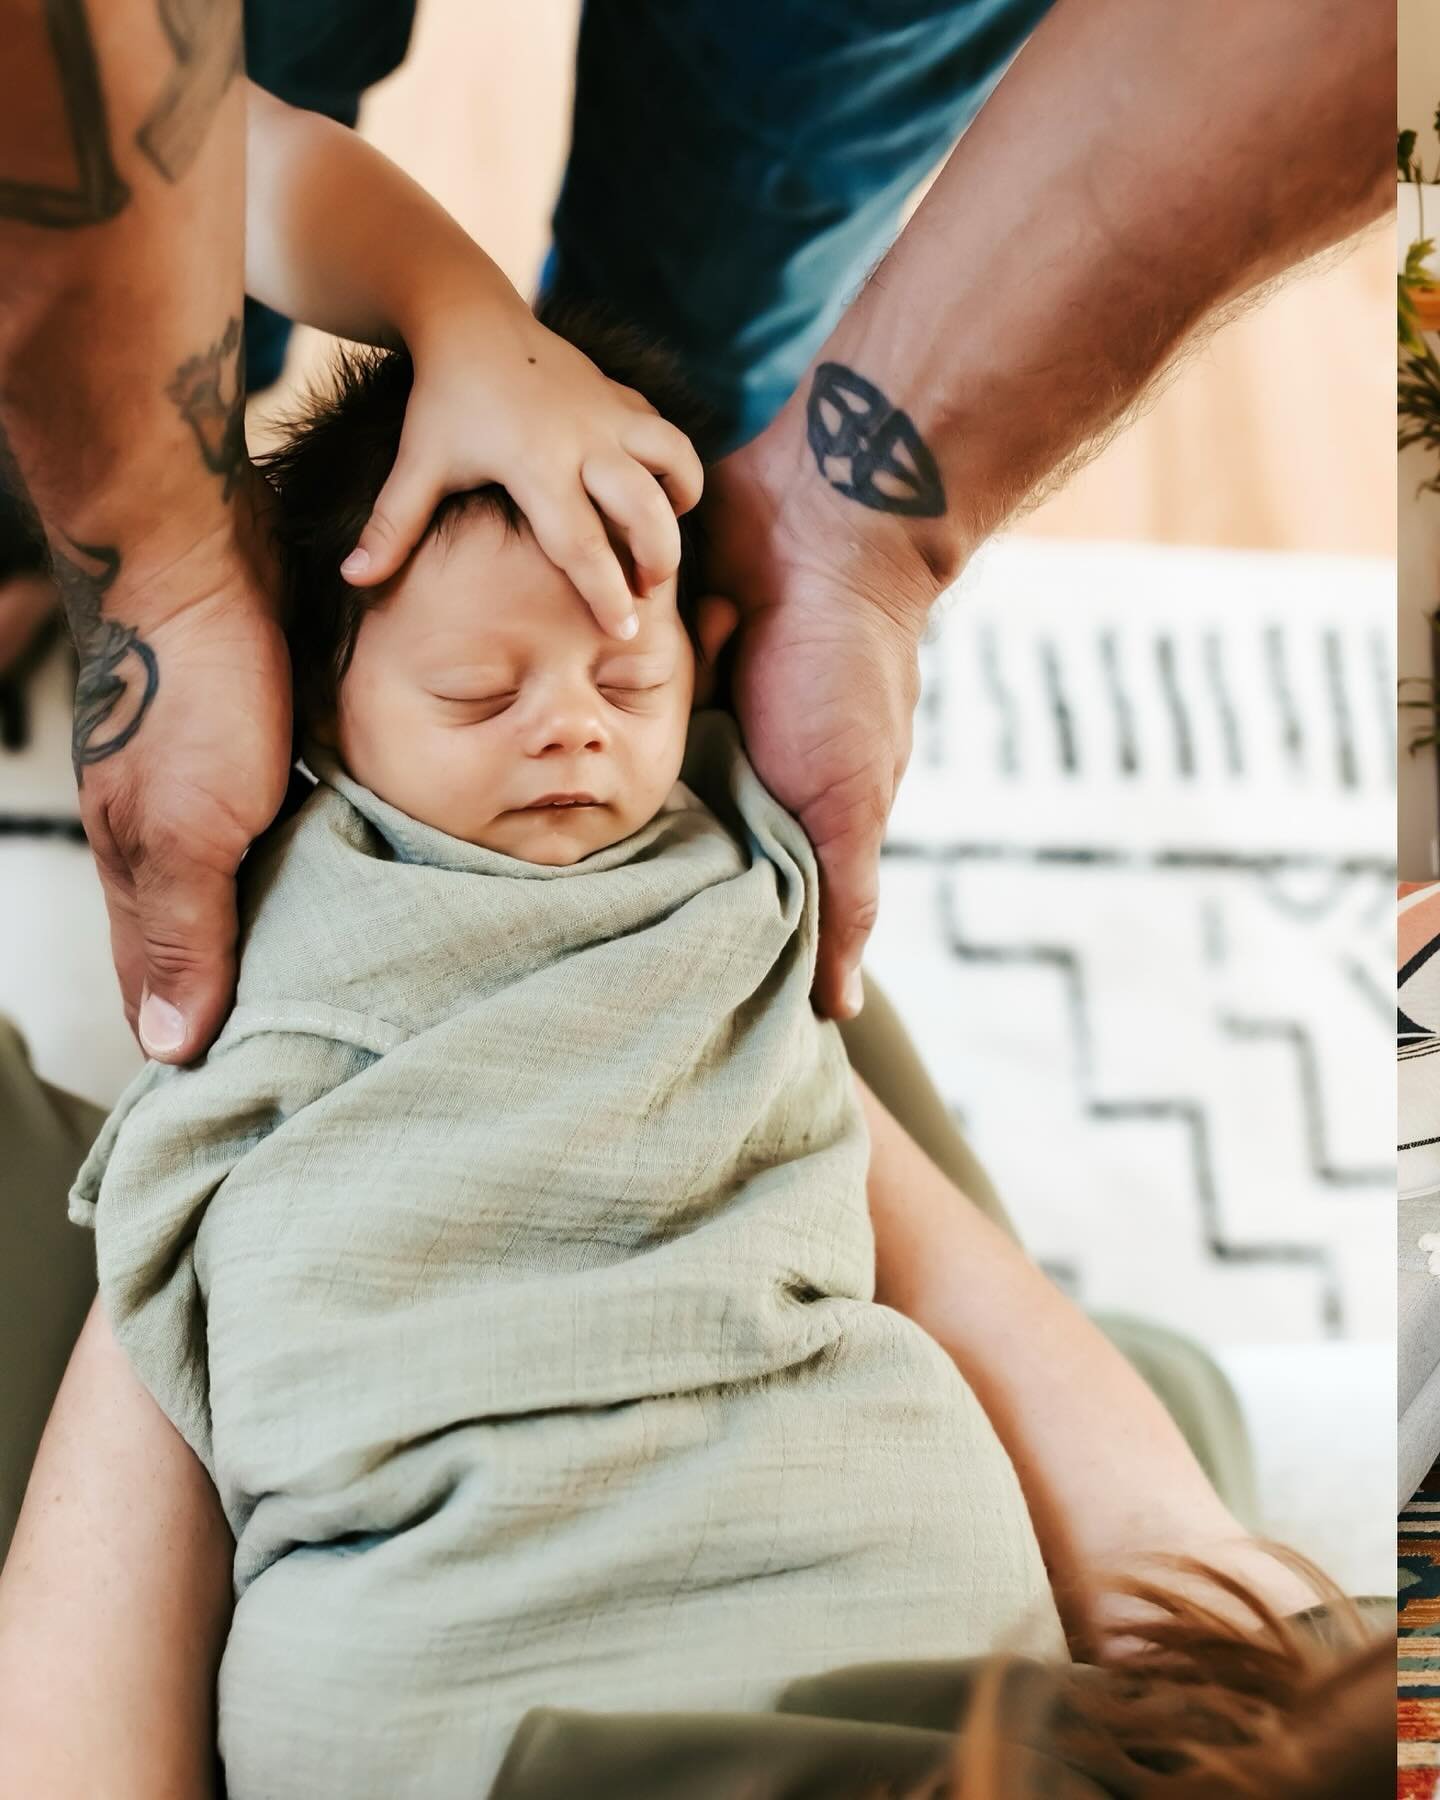 Baby Cedar - 9 days new. Pretty sure Laine and Adam have the most perfect home for in home sessions. PLUS, baby Cedar was amazing and big brother Saylor was absolutely adorable with him. I have too many favorites already! 
.
...
..
.
#themotherhoodex